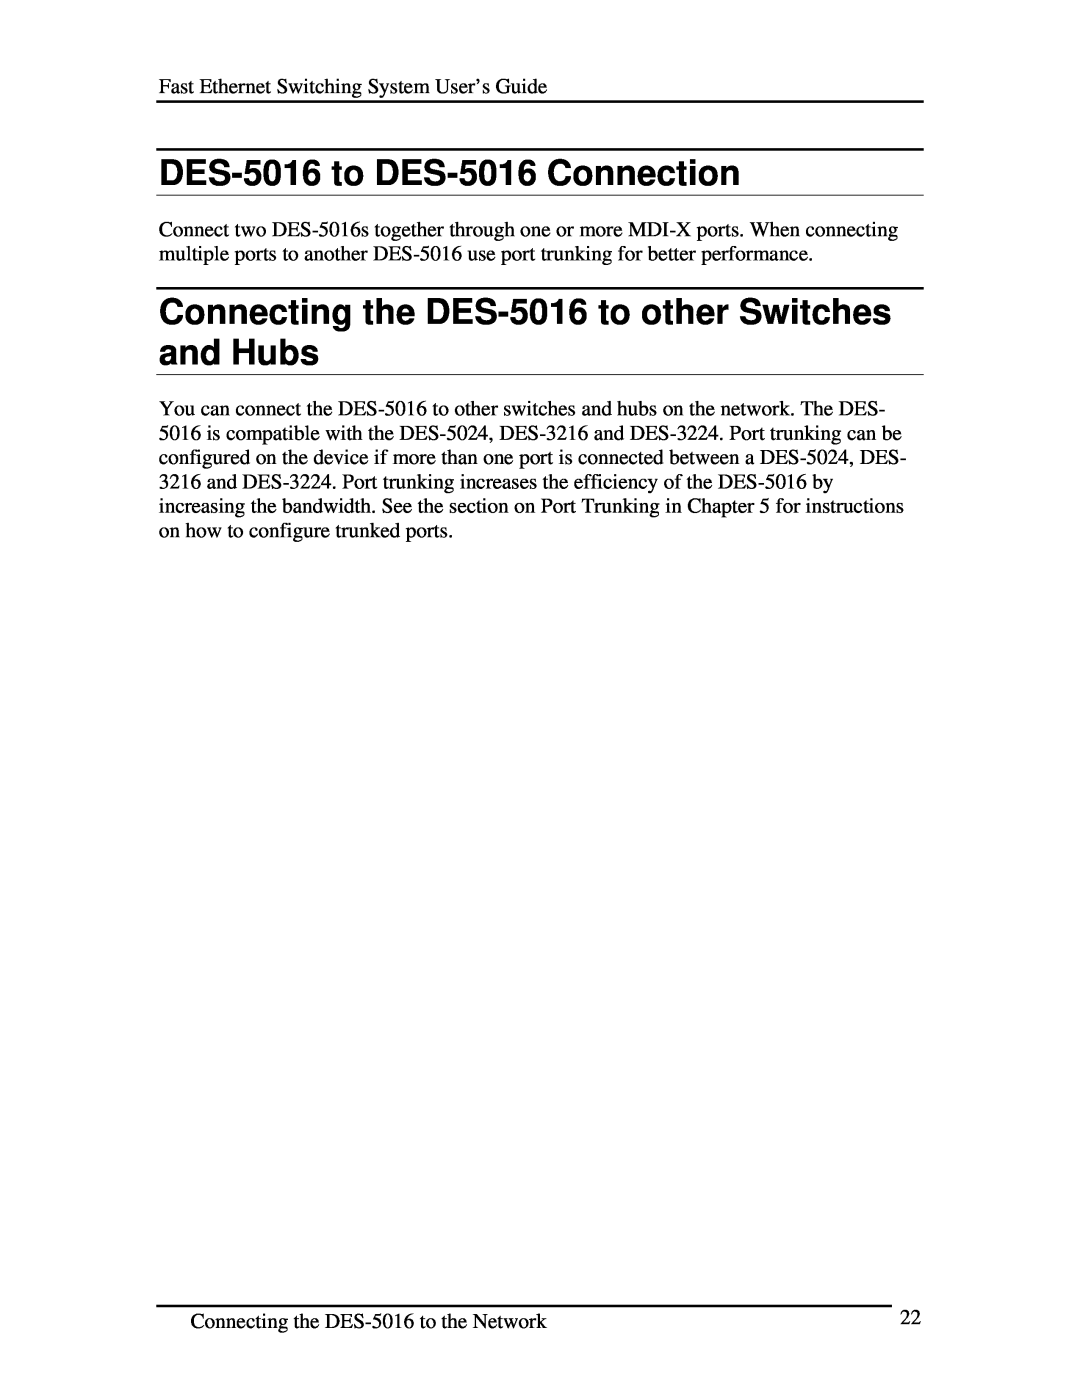 D-Link manual DES-5016 to DES-5016 Connection, Connecting the DES-5016 to other Switches and Hubs 